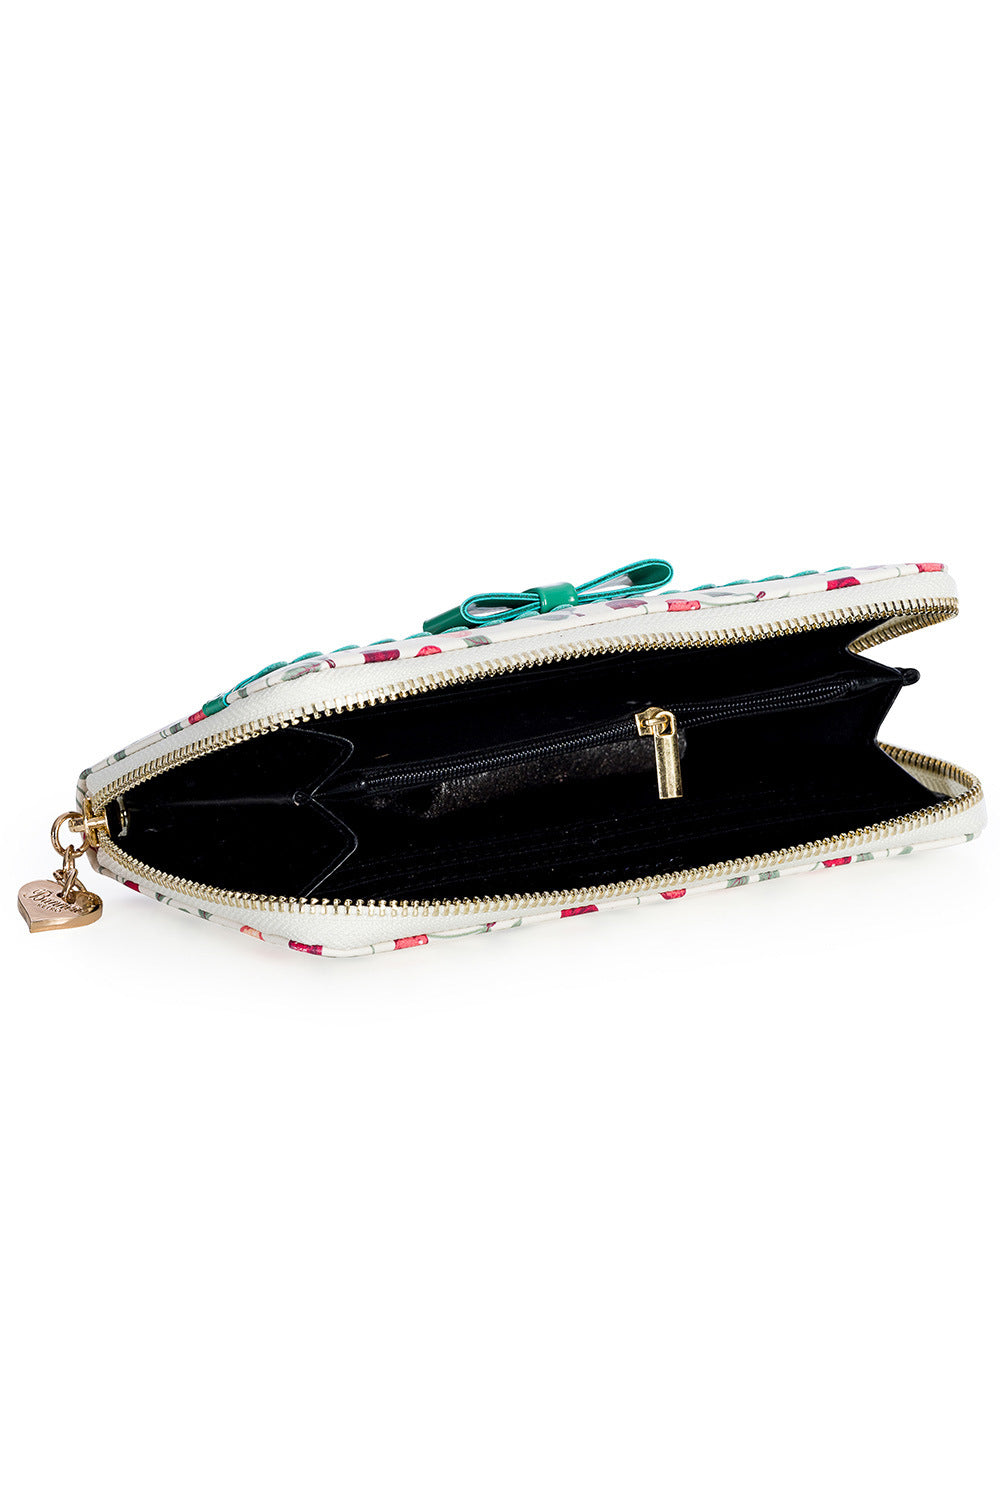 The Country Cherry purse laid flat with the zip undone showing the zip compartment inside and card holding compartments